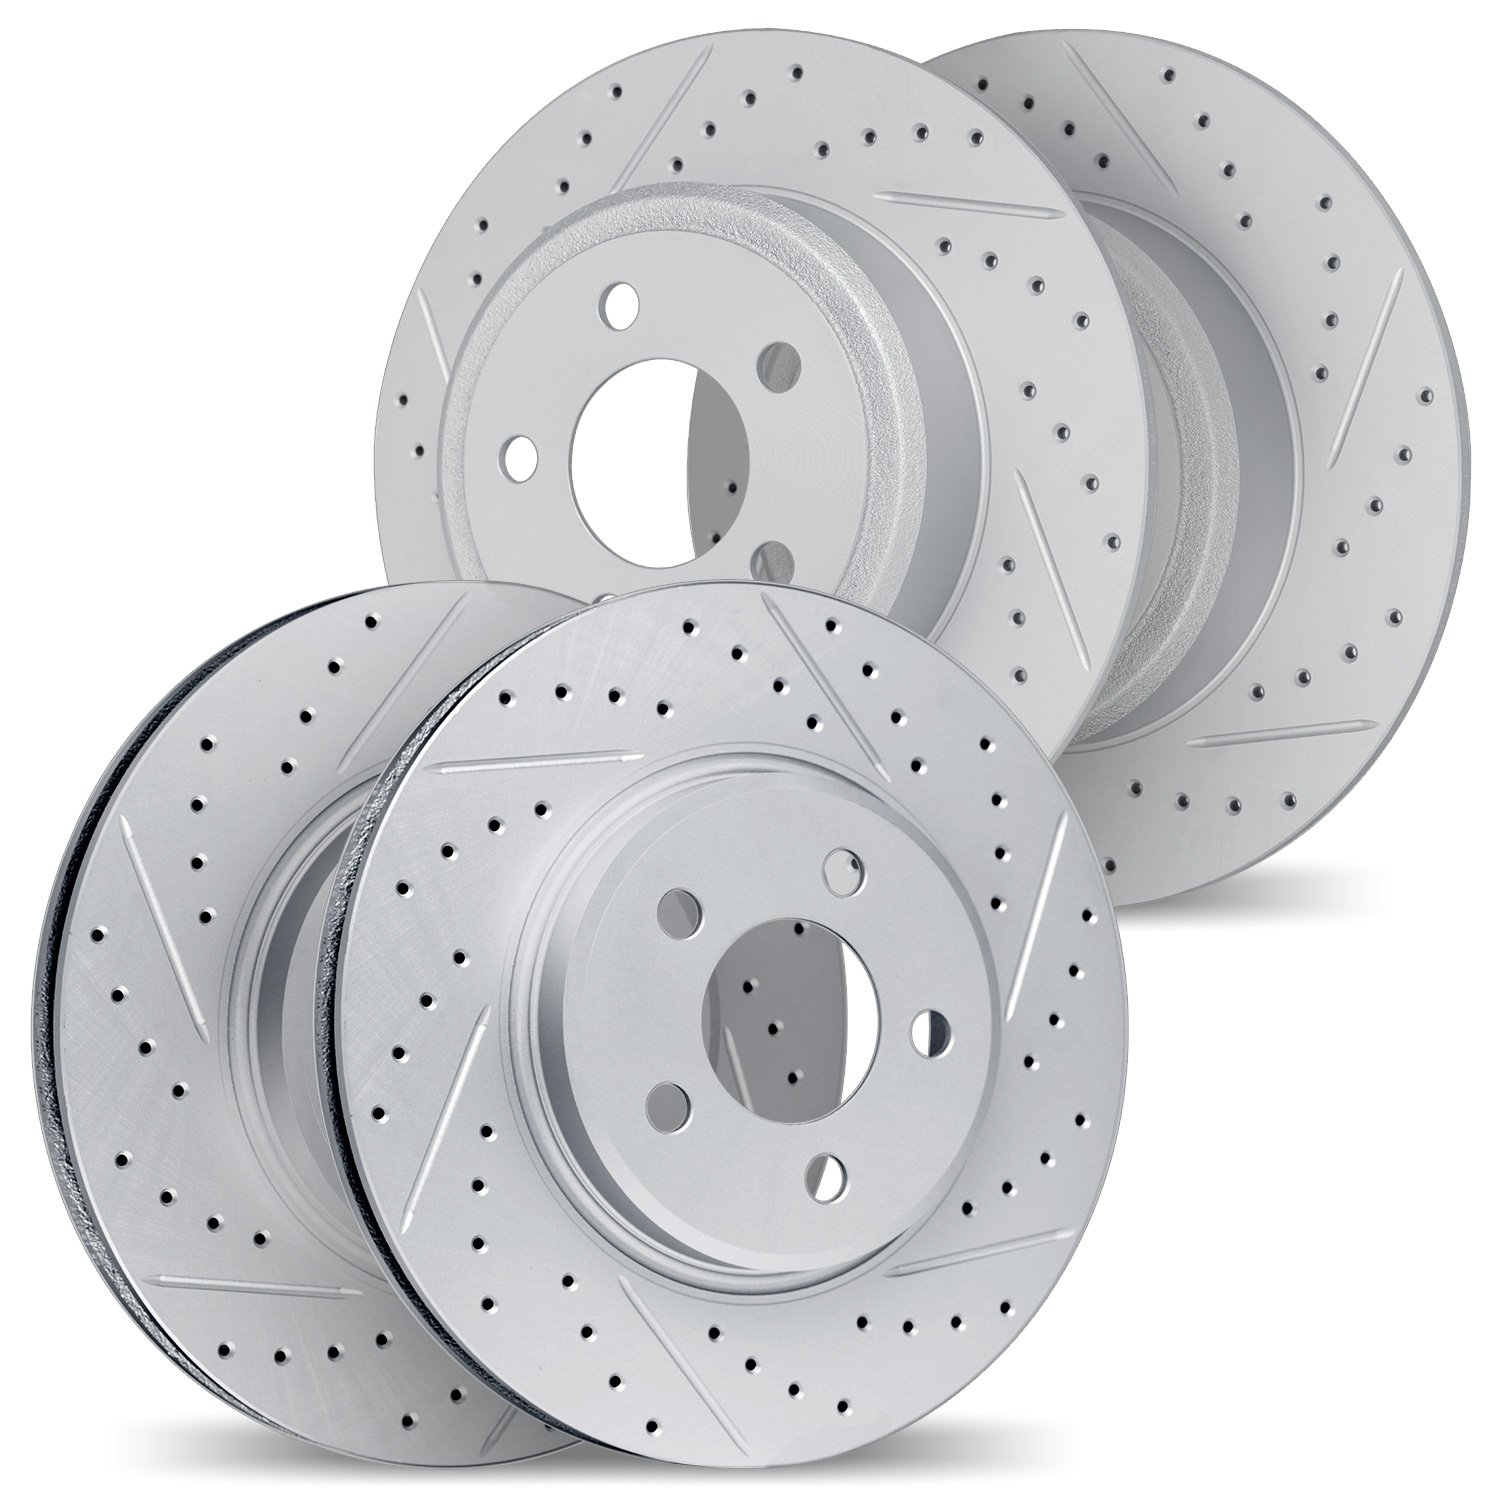 2004-39013 Geoperformance Drilled/Slotted Brake Rotors, Fits Select Mopar, Position: Front and Rear